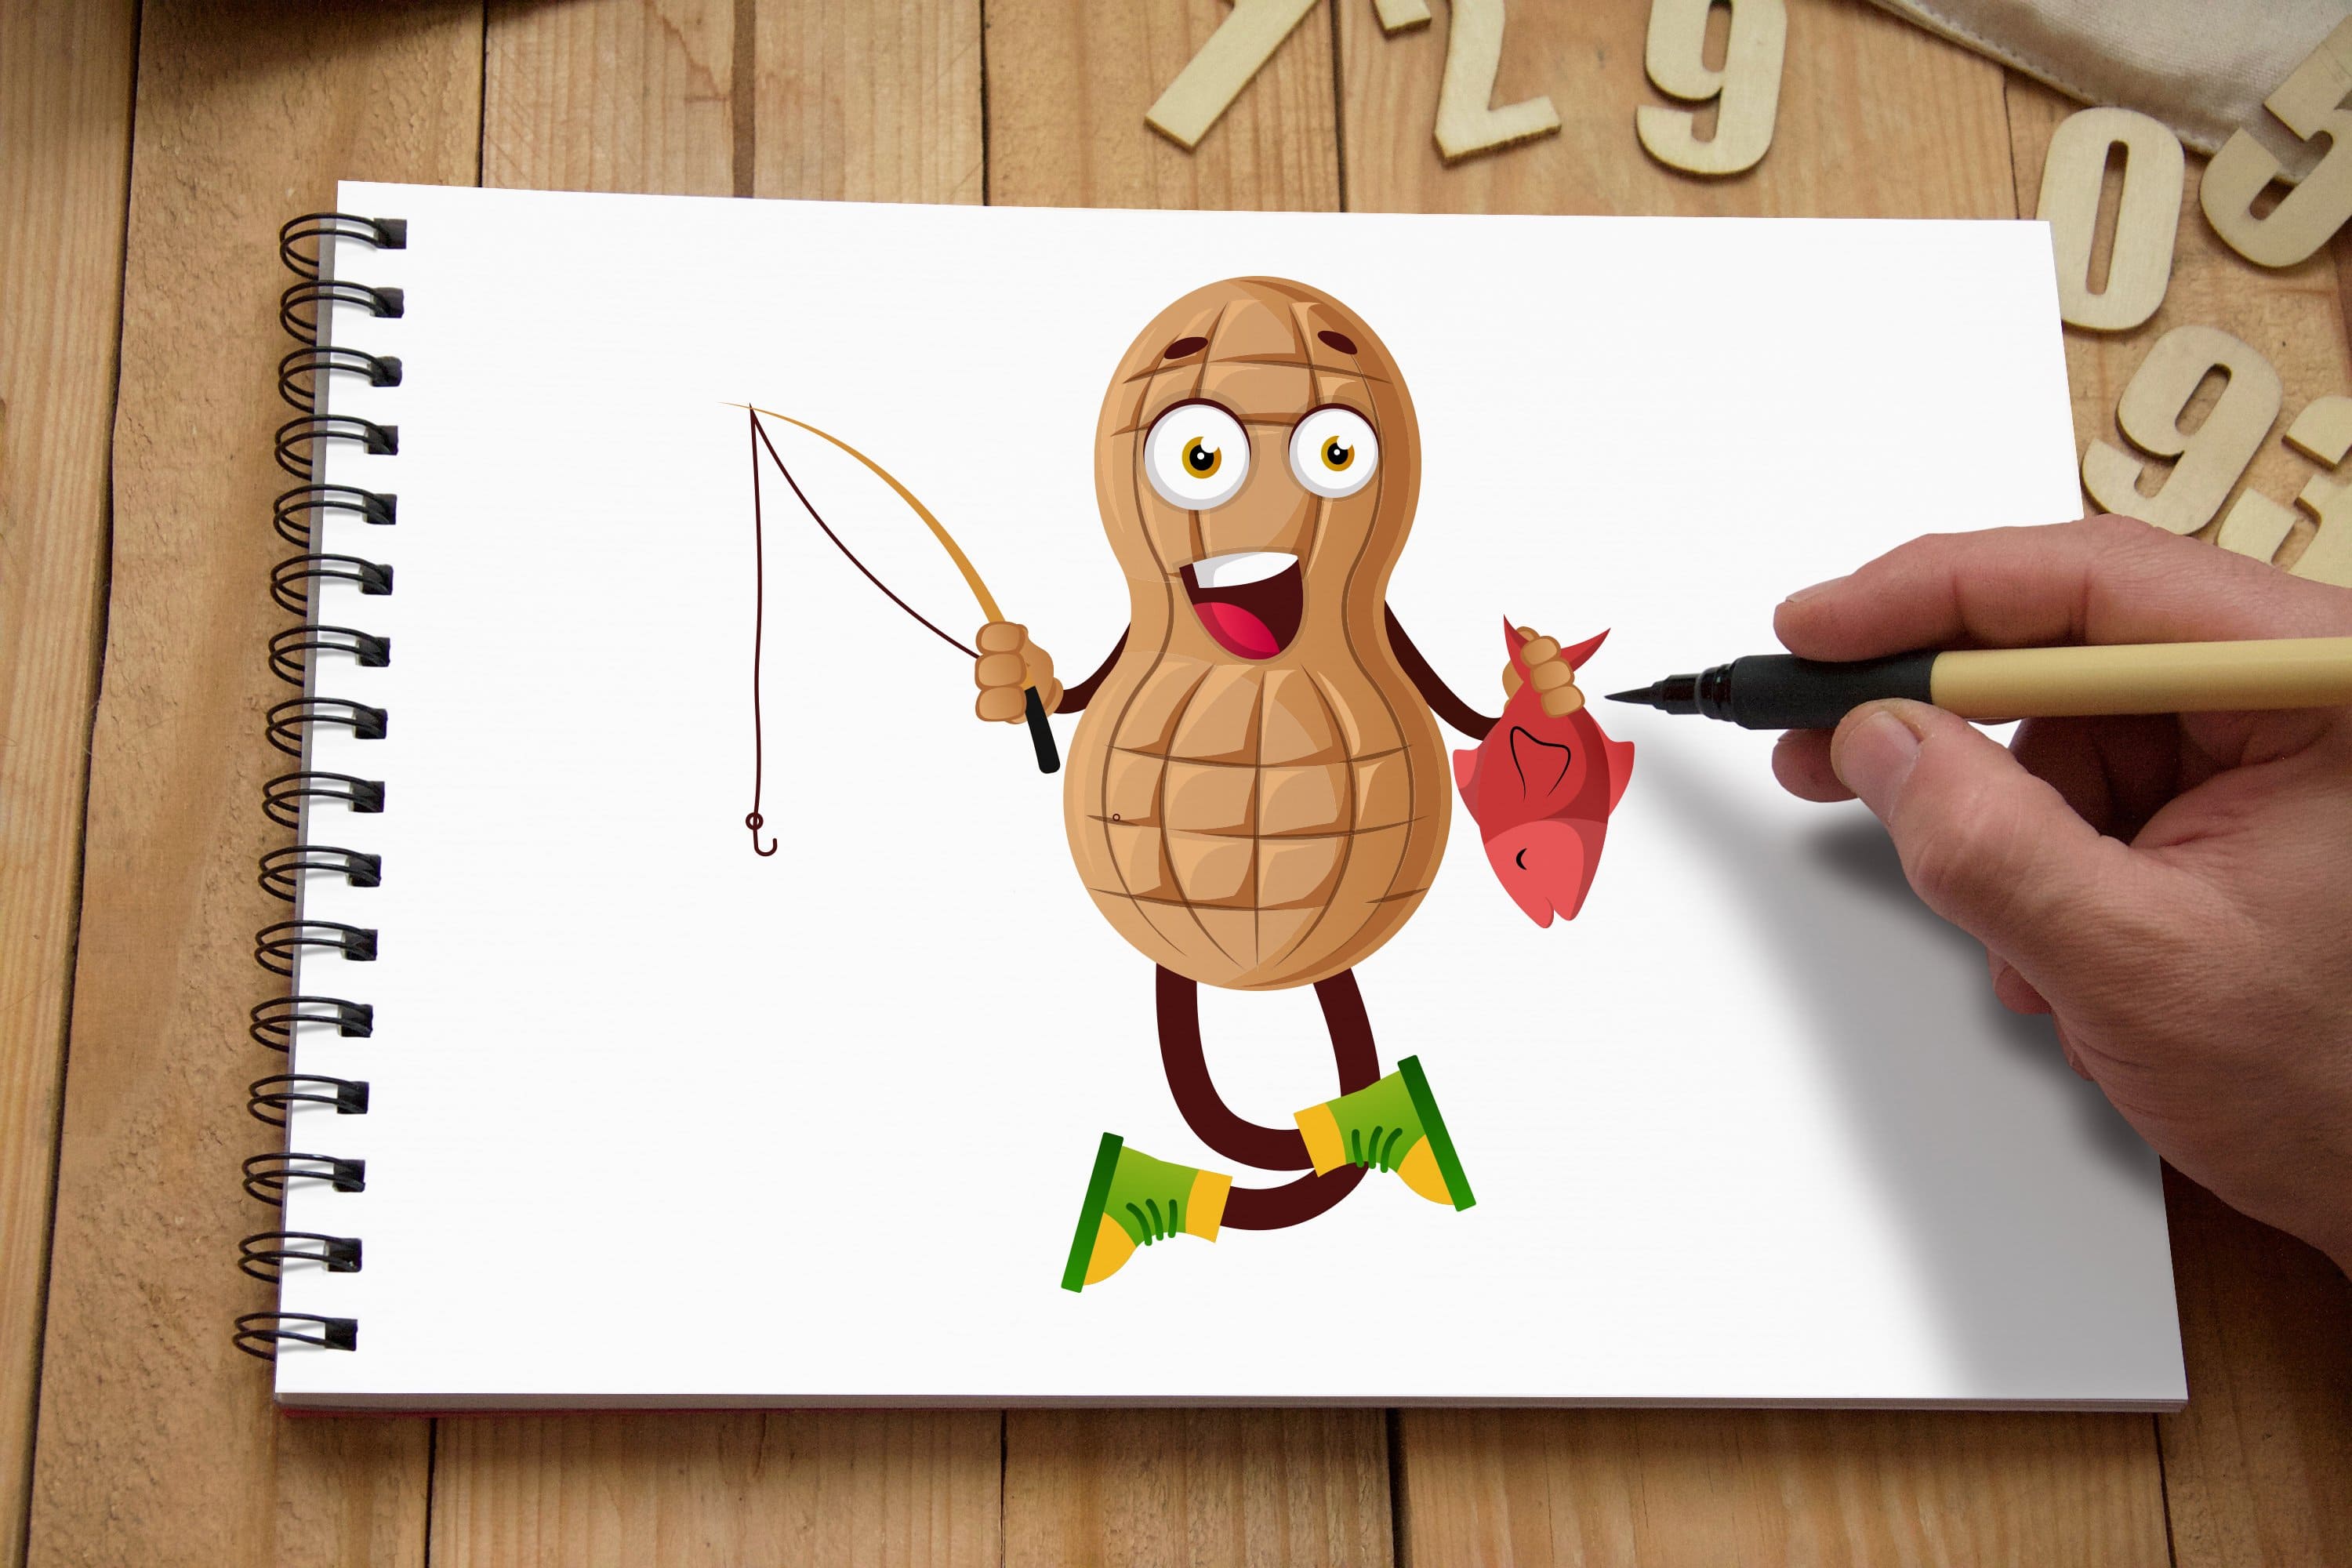 Mr. Peanut on a page in a notebook.